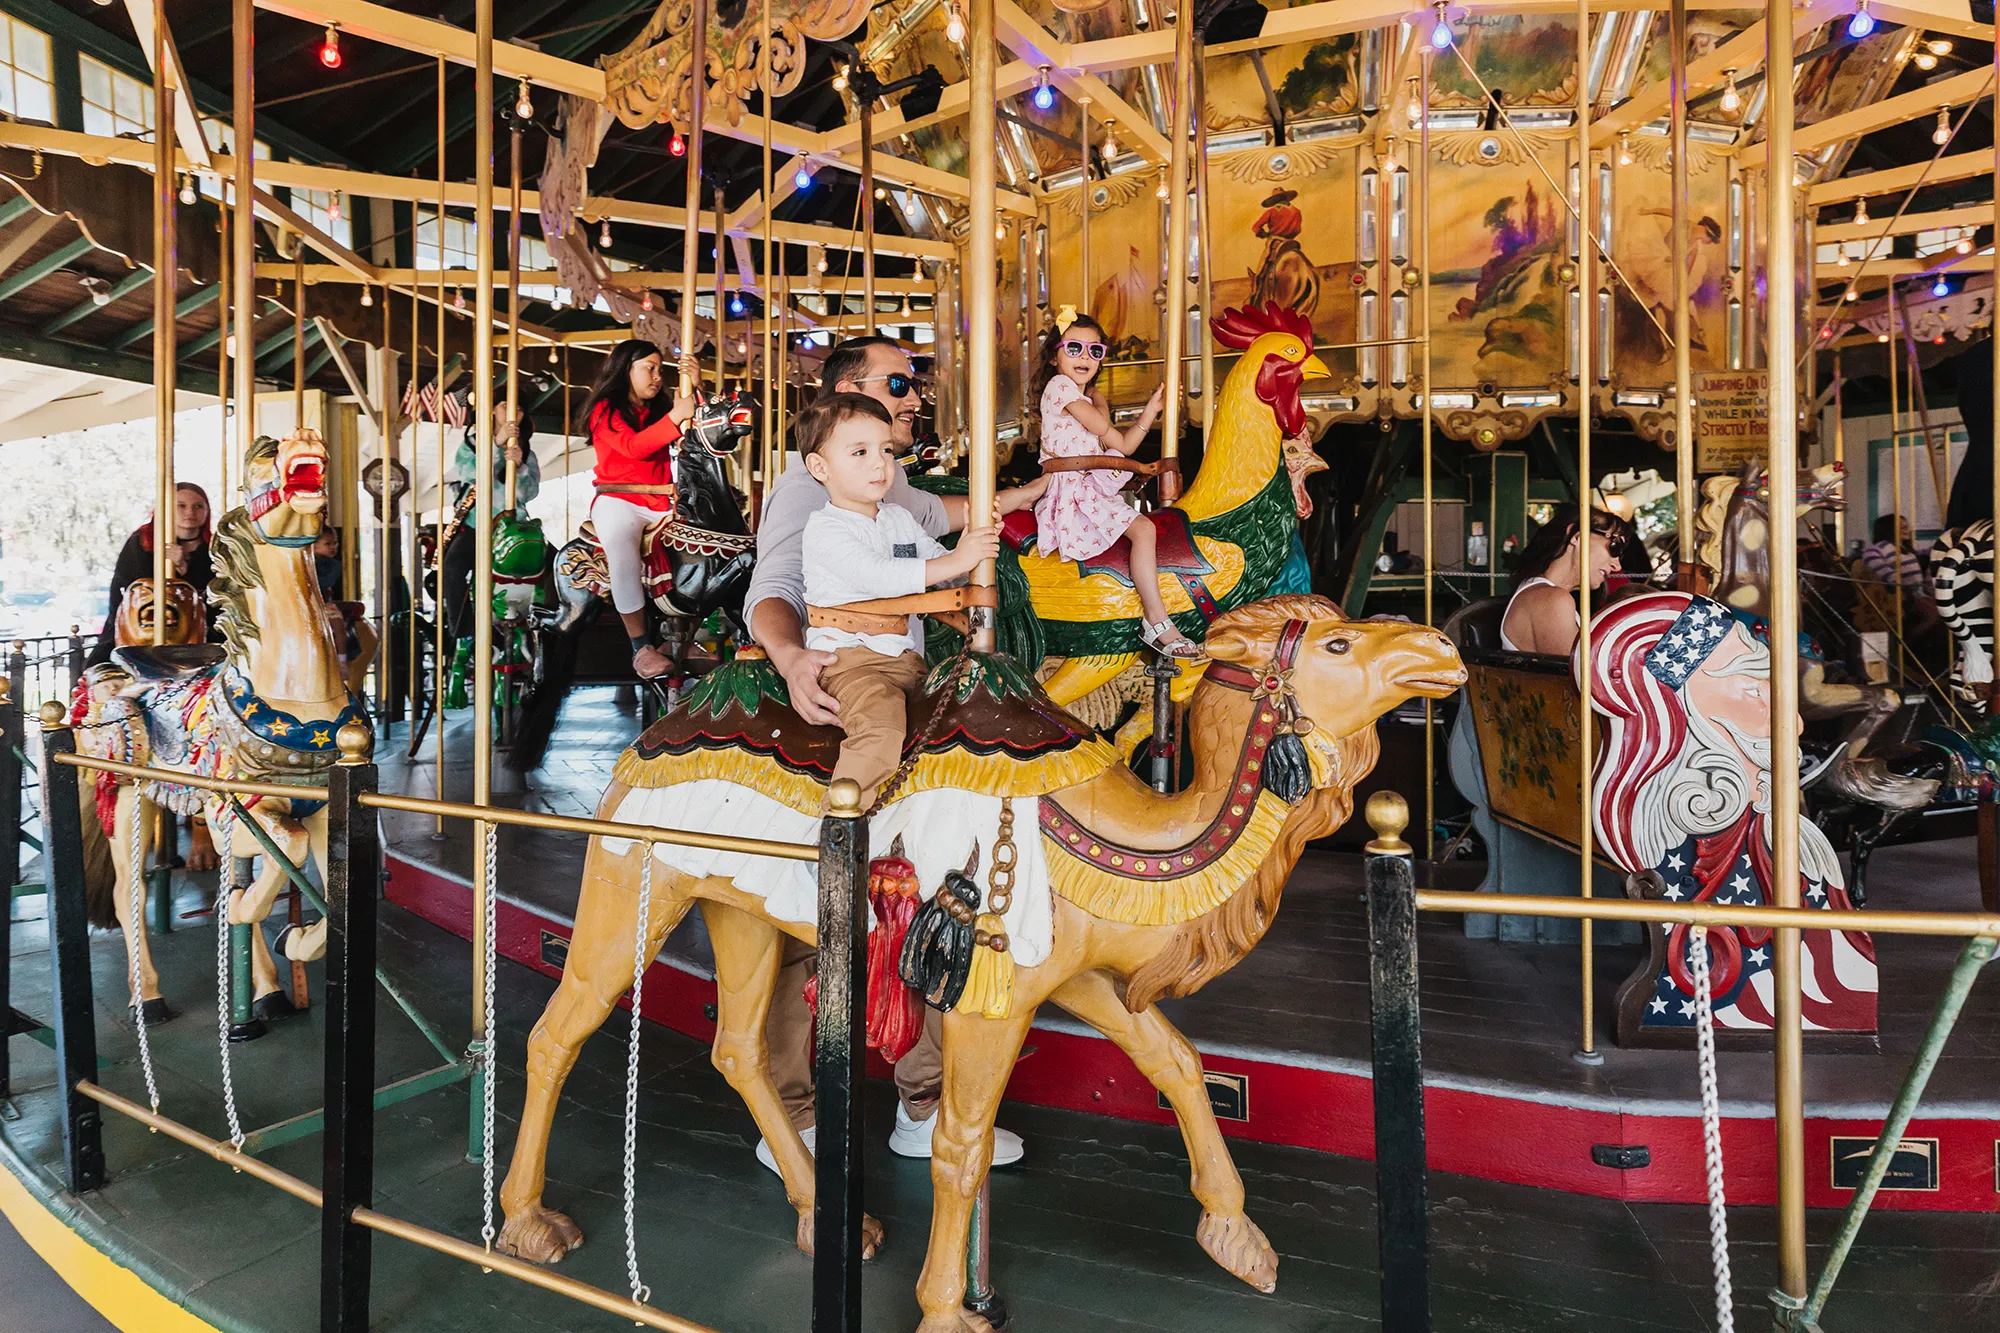 Adult and child riding on a camel on a carousel